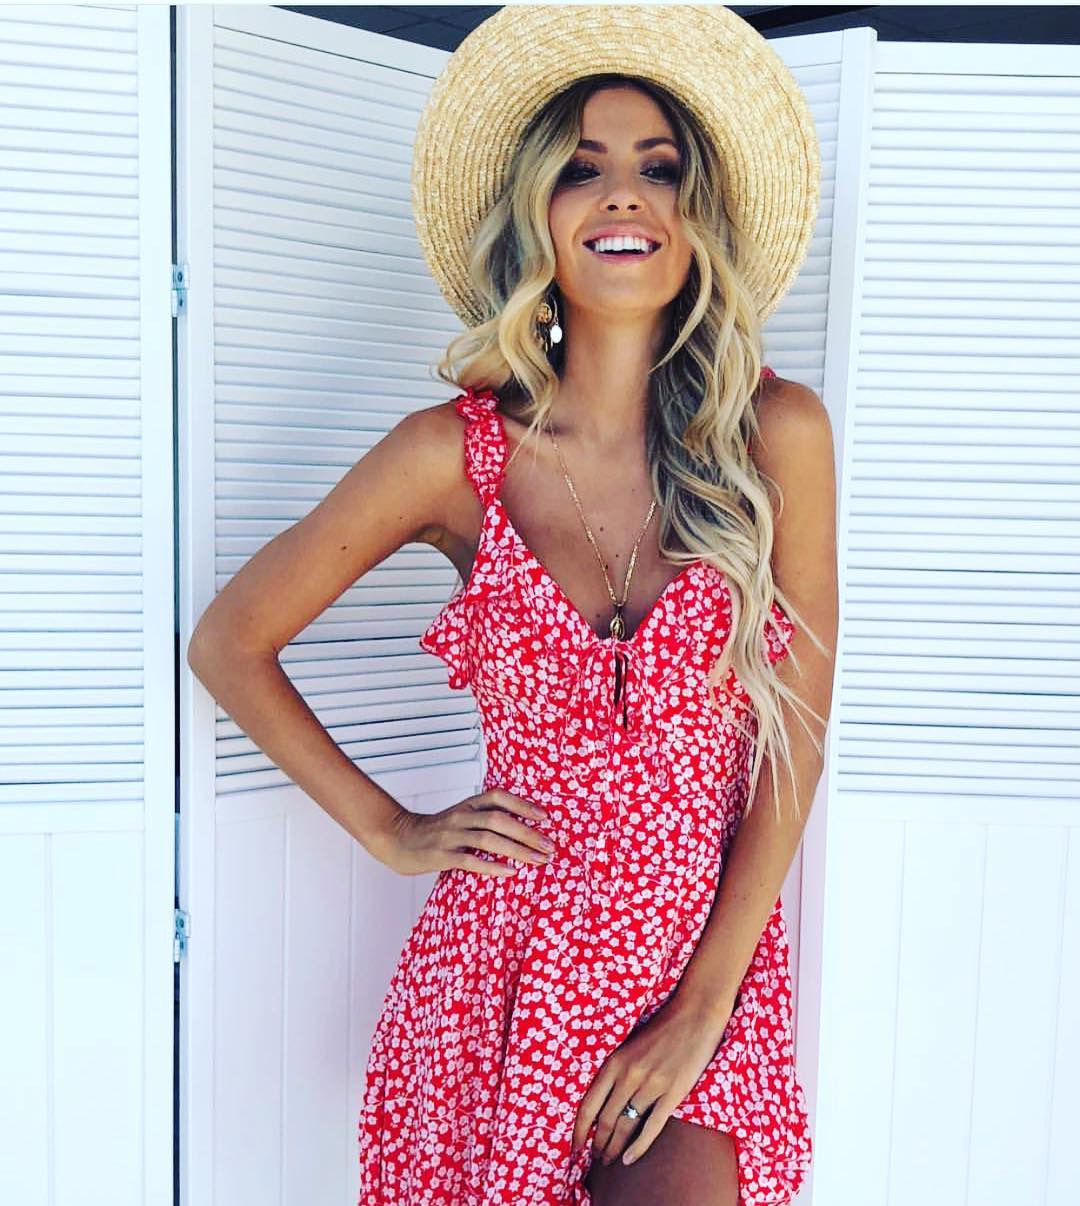 Sleeveless Dress In Summer Floral Prints With Hat